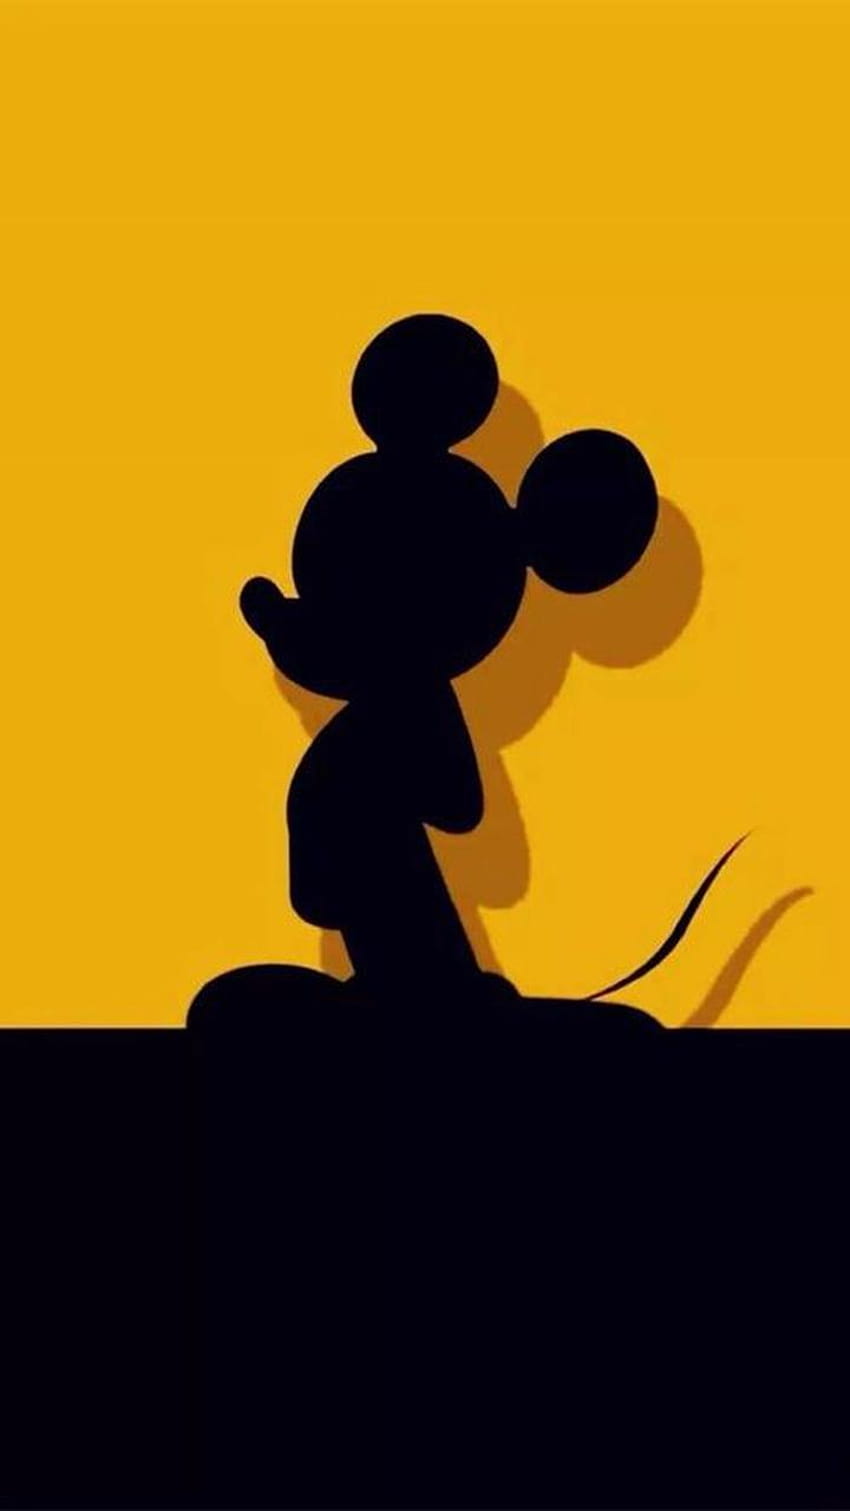 Mickey mouse wallpaper for iPhone and Android - Yellow iphone